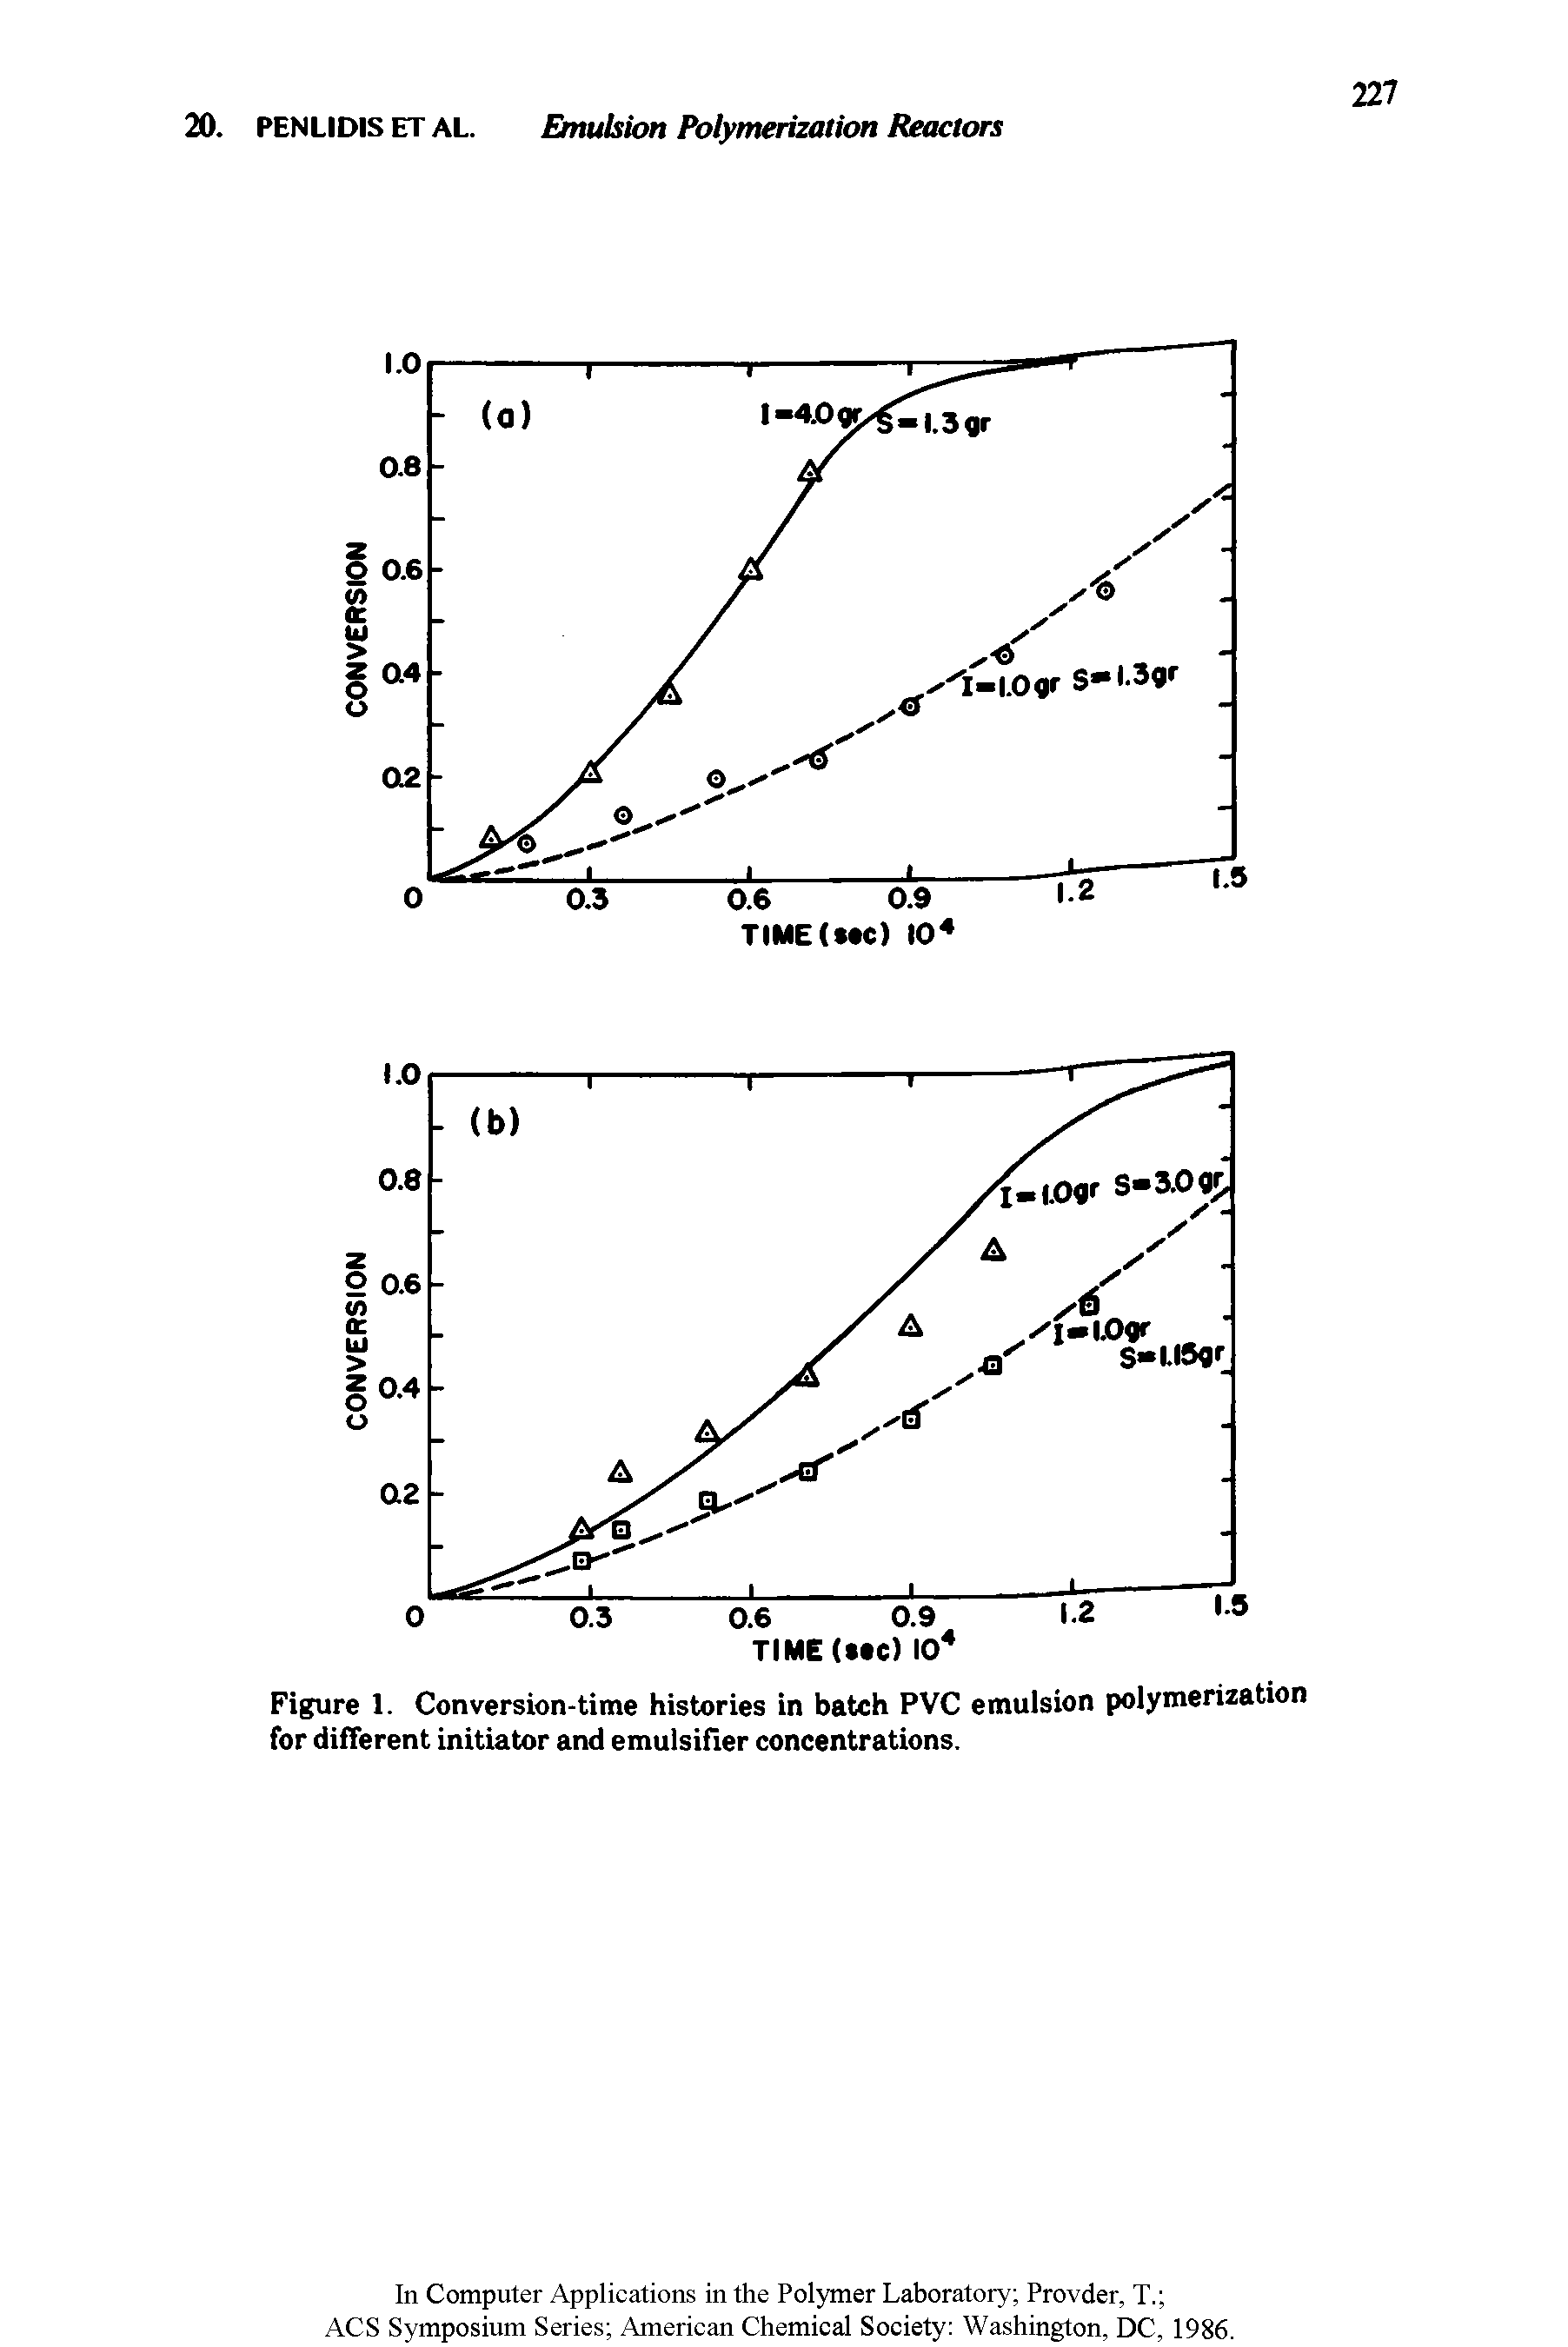 Figure 1. Conversion-time histories in batch PVC emulsion polymerization for different initiator and emulsifier concentrations.